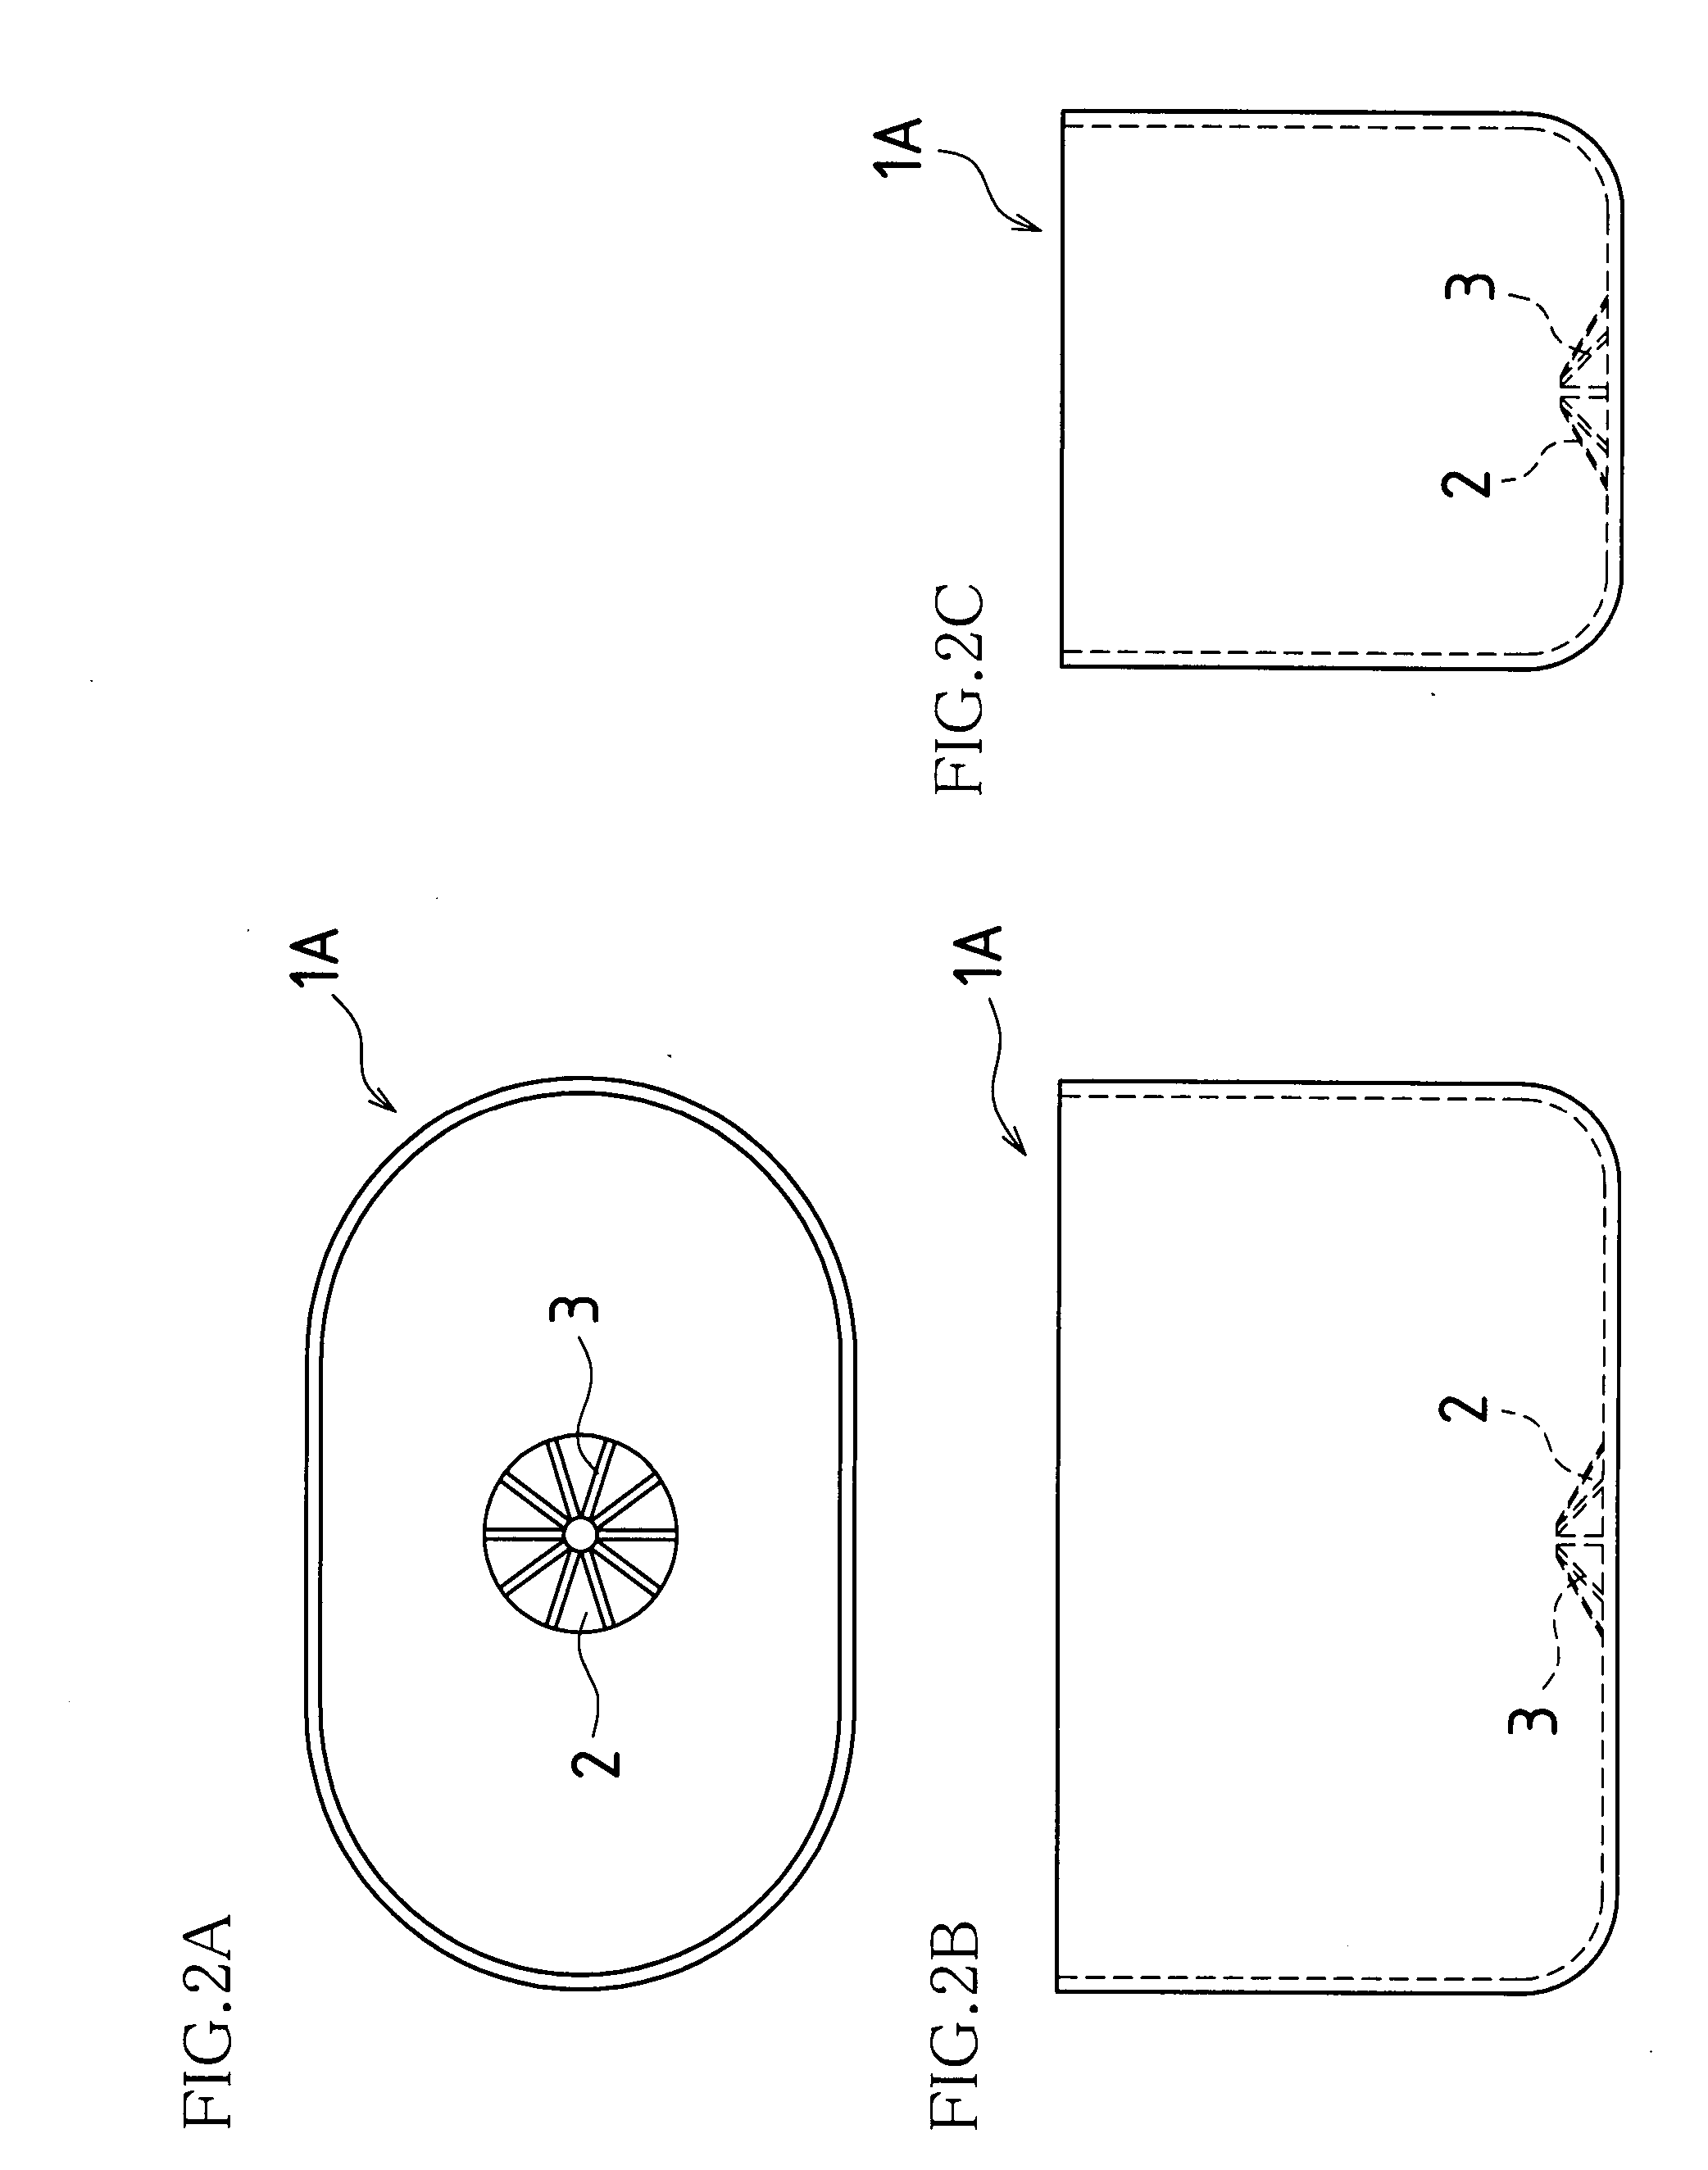 Method for hydroponic plant culture and container for same